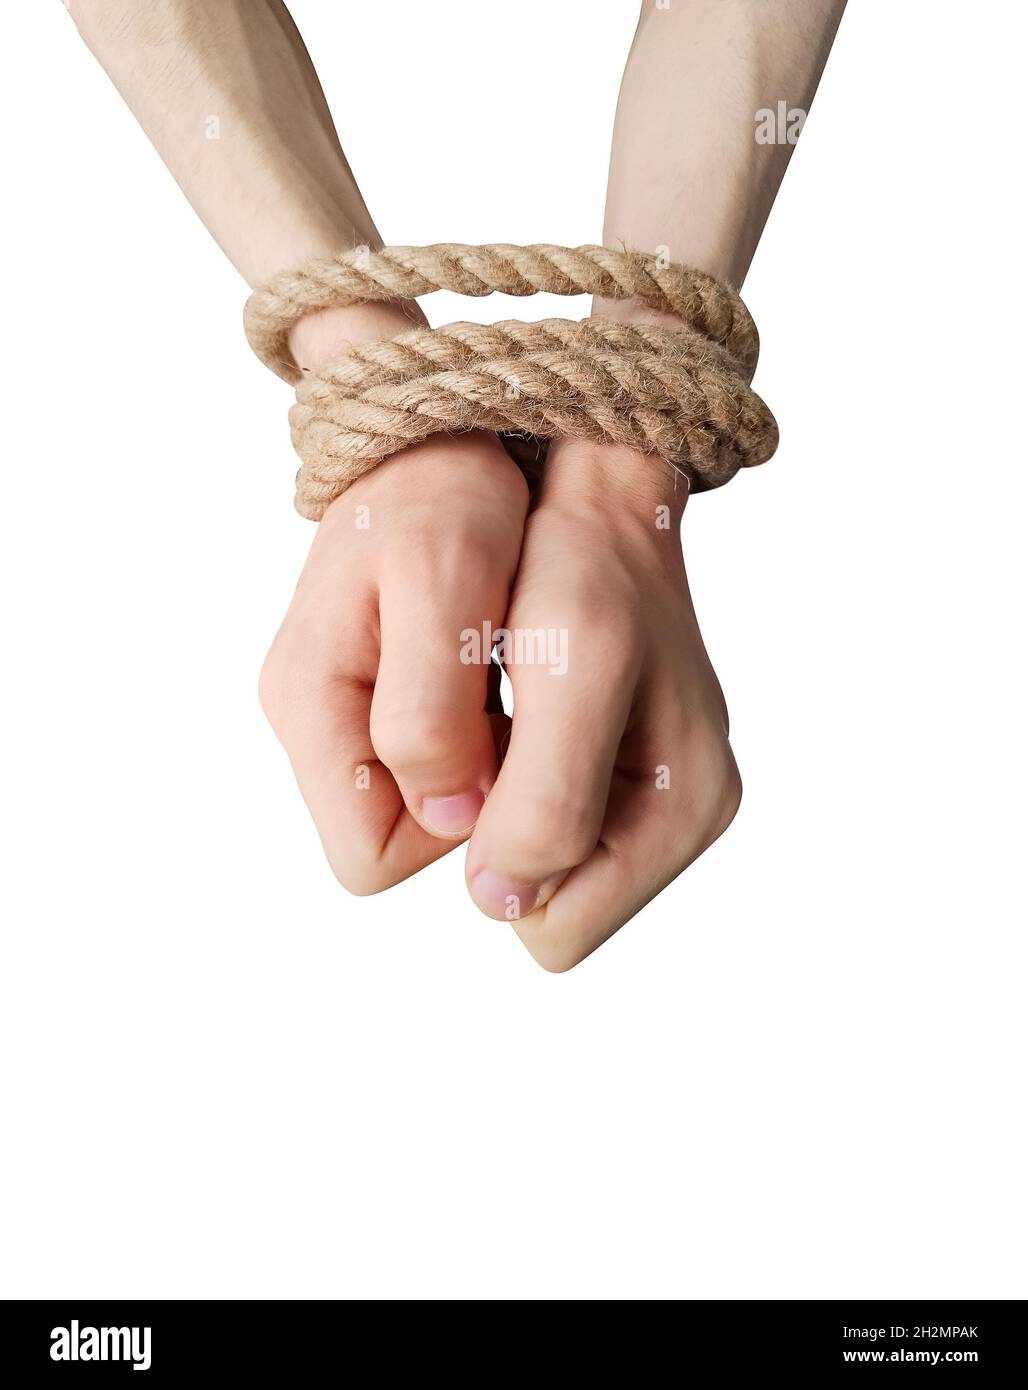 Teenager's hands tied with a rope cord isolated on white background Stock Photo